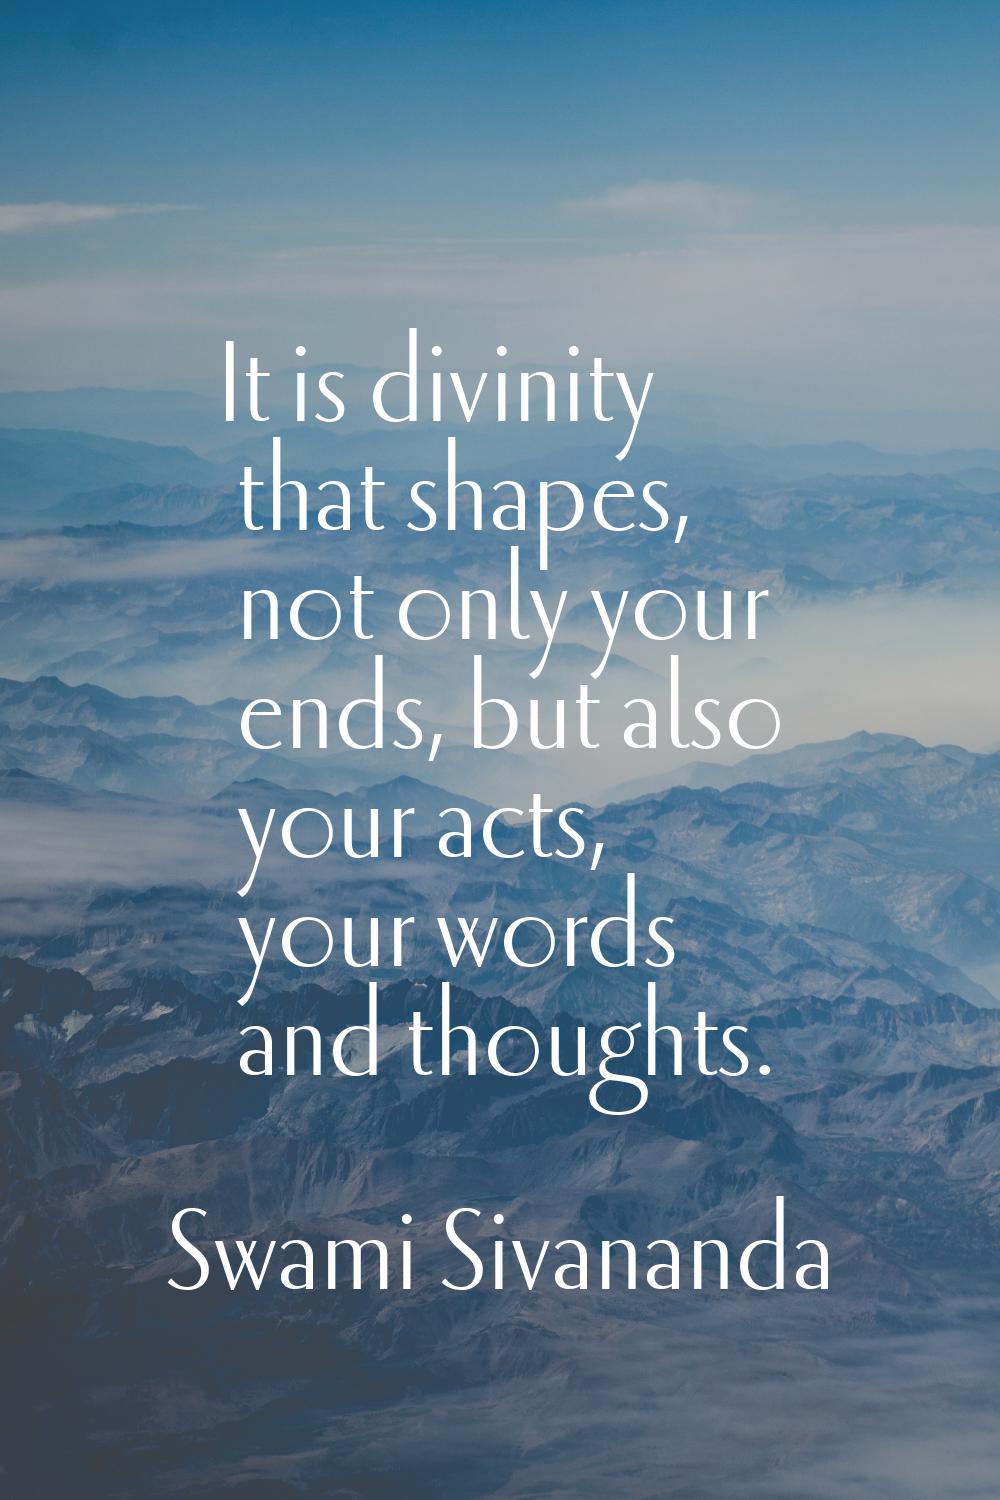 It is divinity that shapes, not only your ends, but also your acts, your words and thoughts.